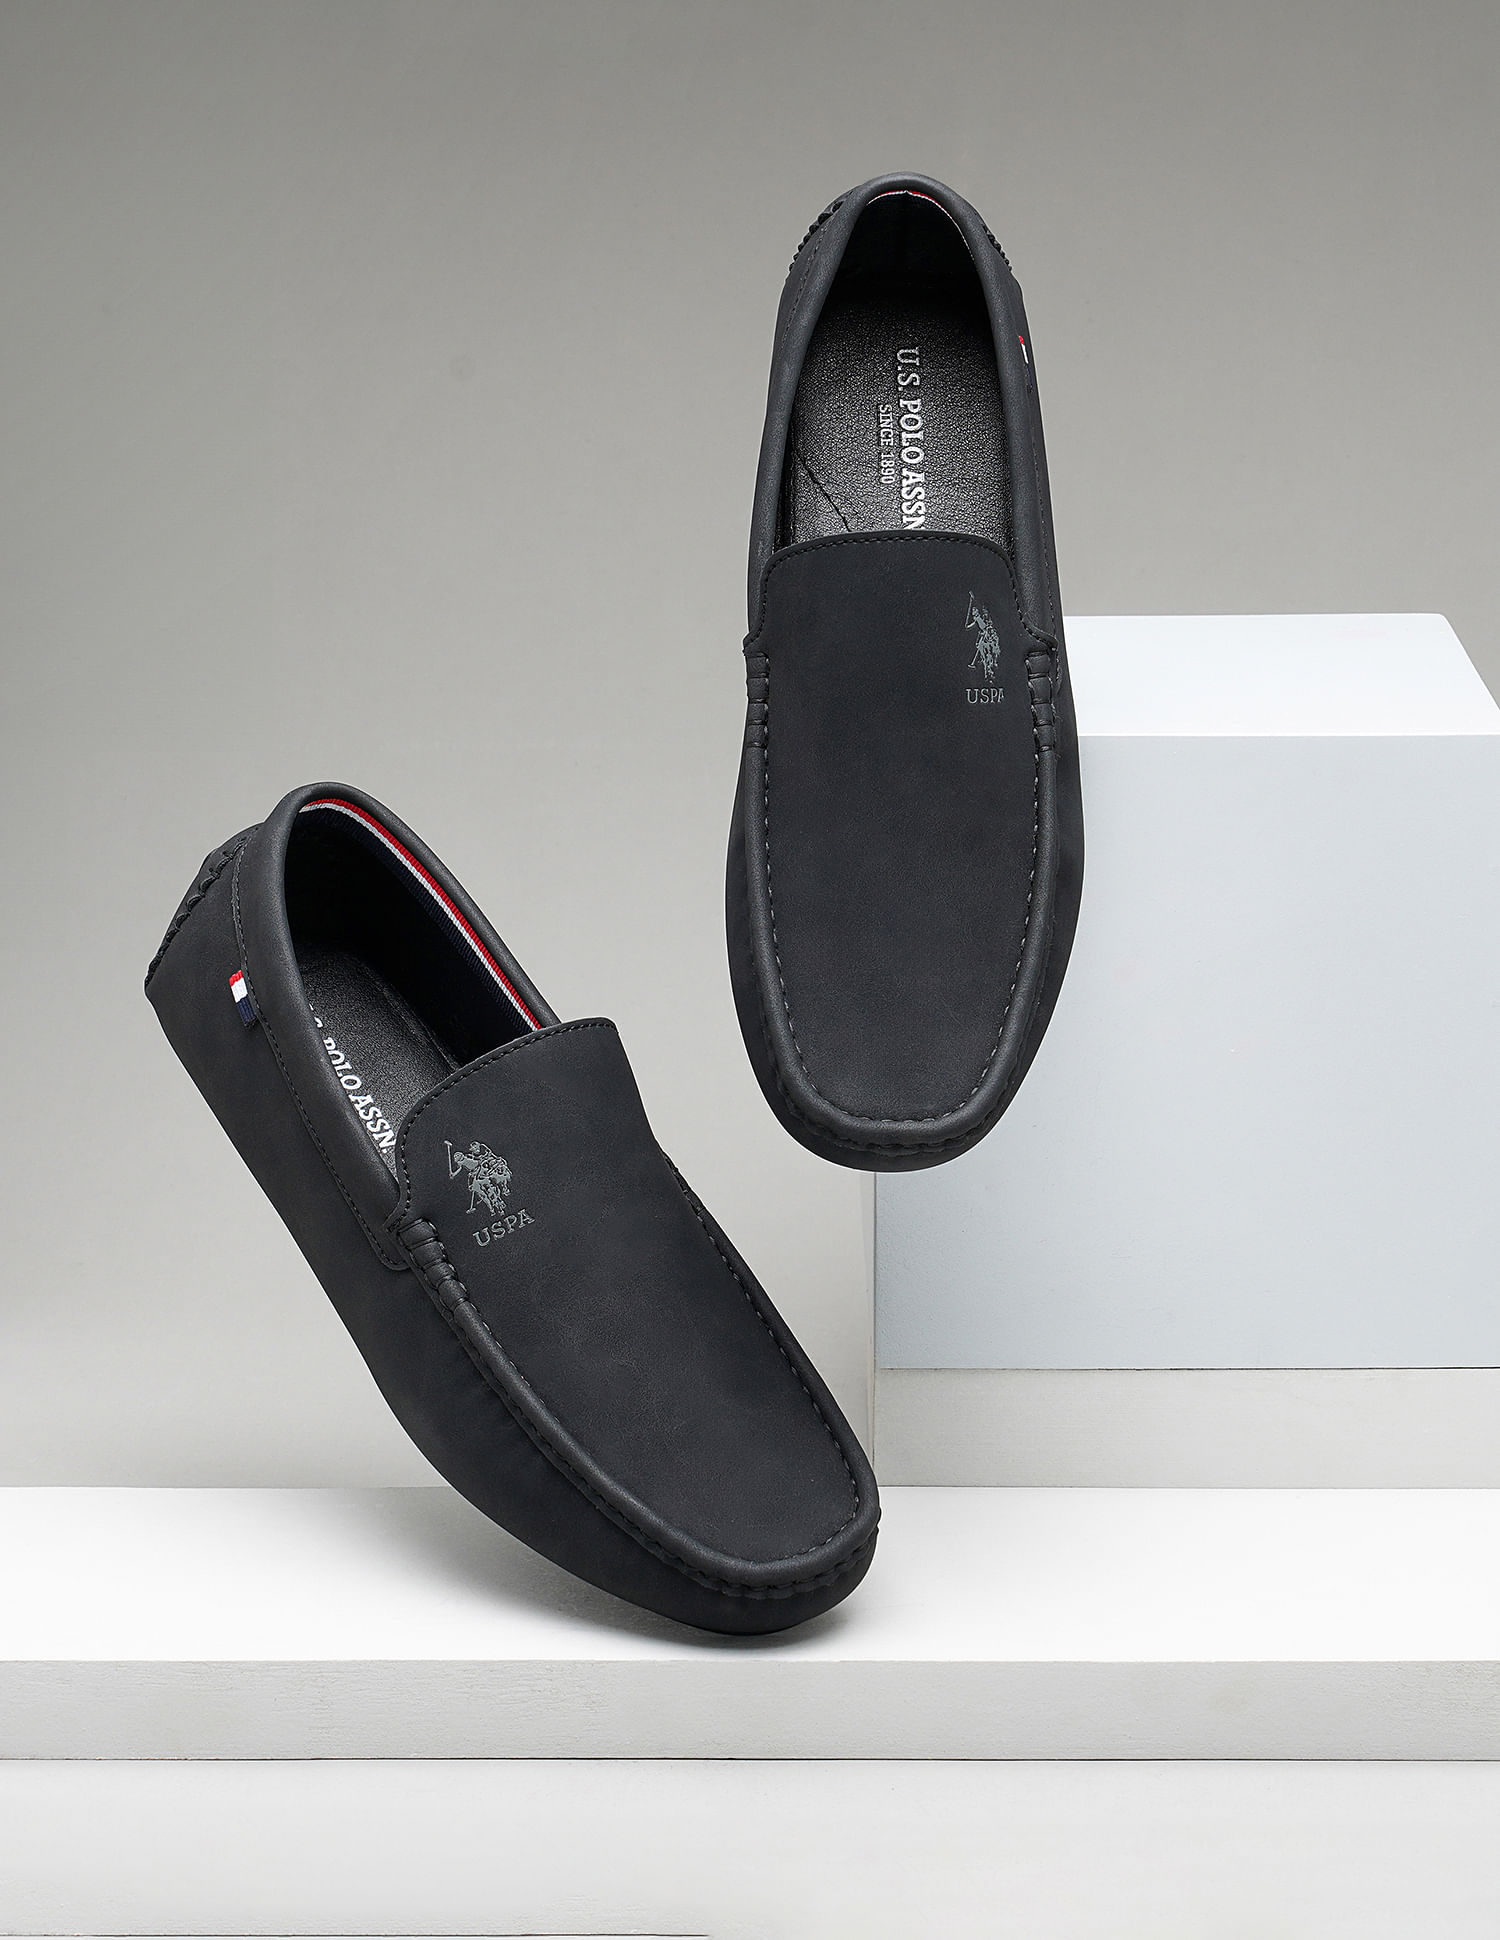 helbrede log Tranquility Buy U.S. Polo Assn. Round Toe Aaron 3.0 Loafers - NNNOW.com